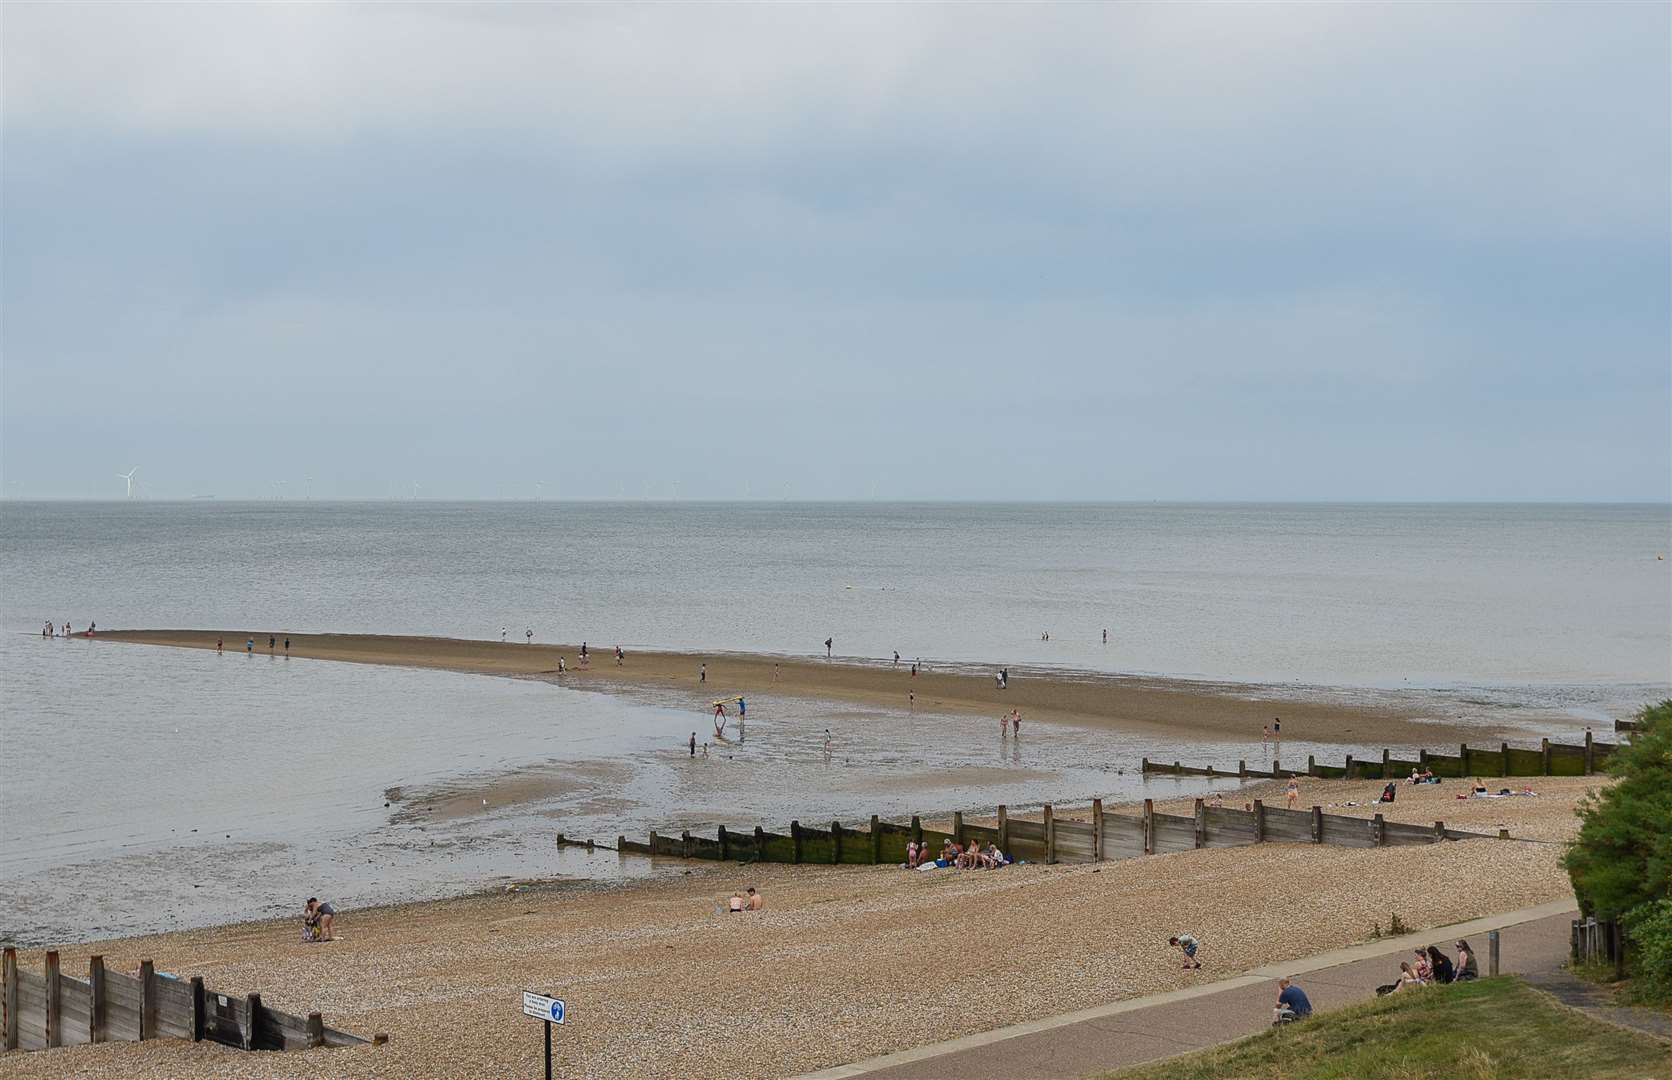 Tankerton beach where Peter Andrews found the dinghy